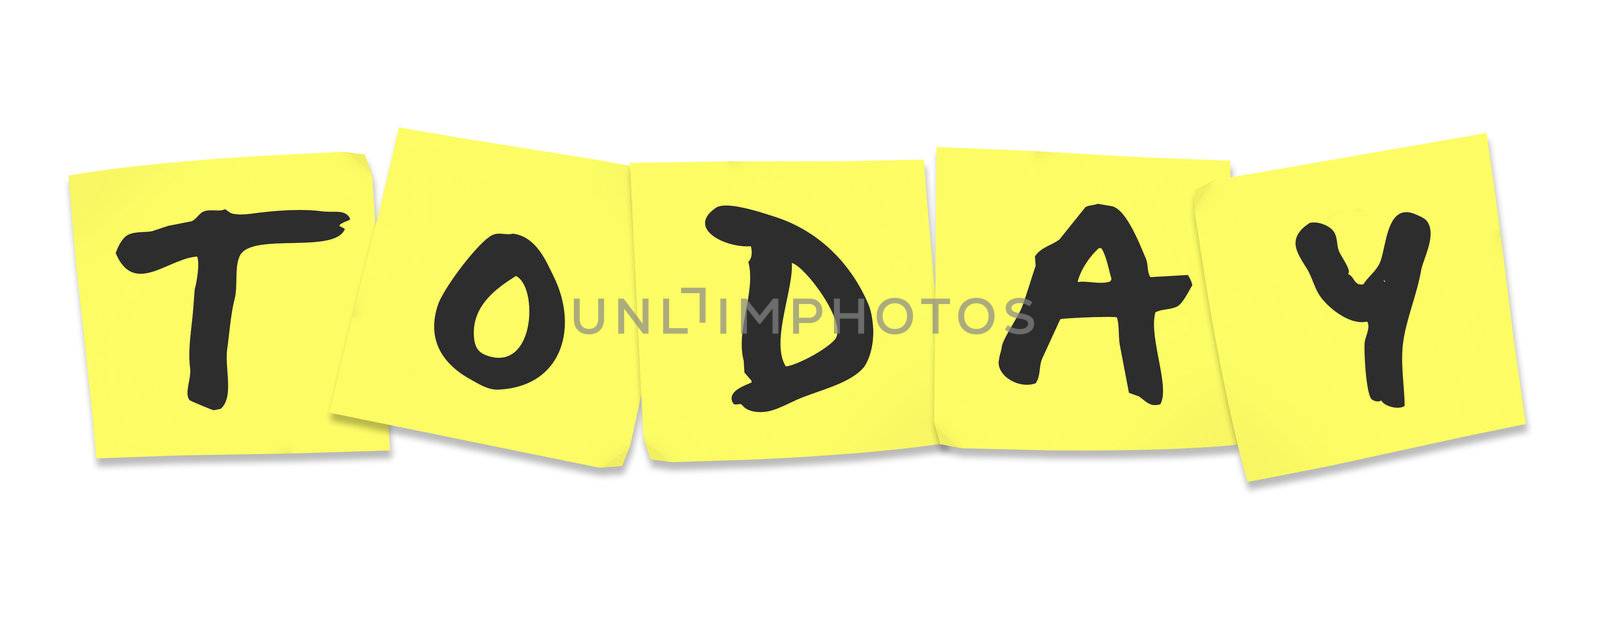 The word Today written on yellow sticky notes reminding you of tasks to do on this day or date and remember important things